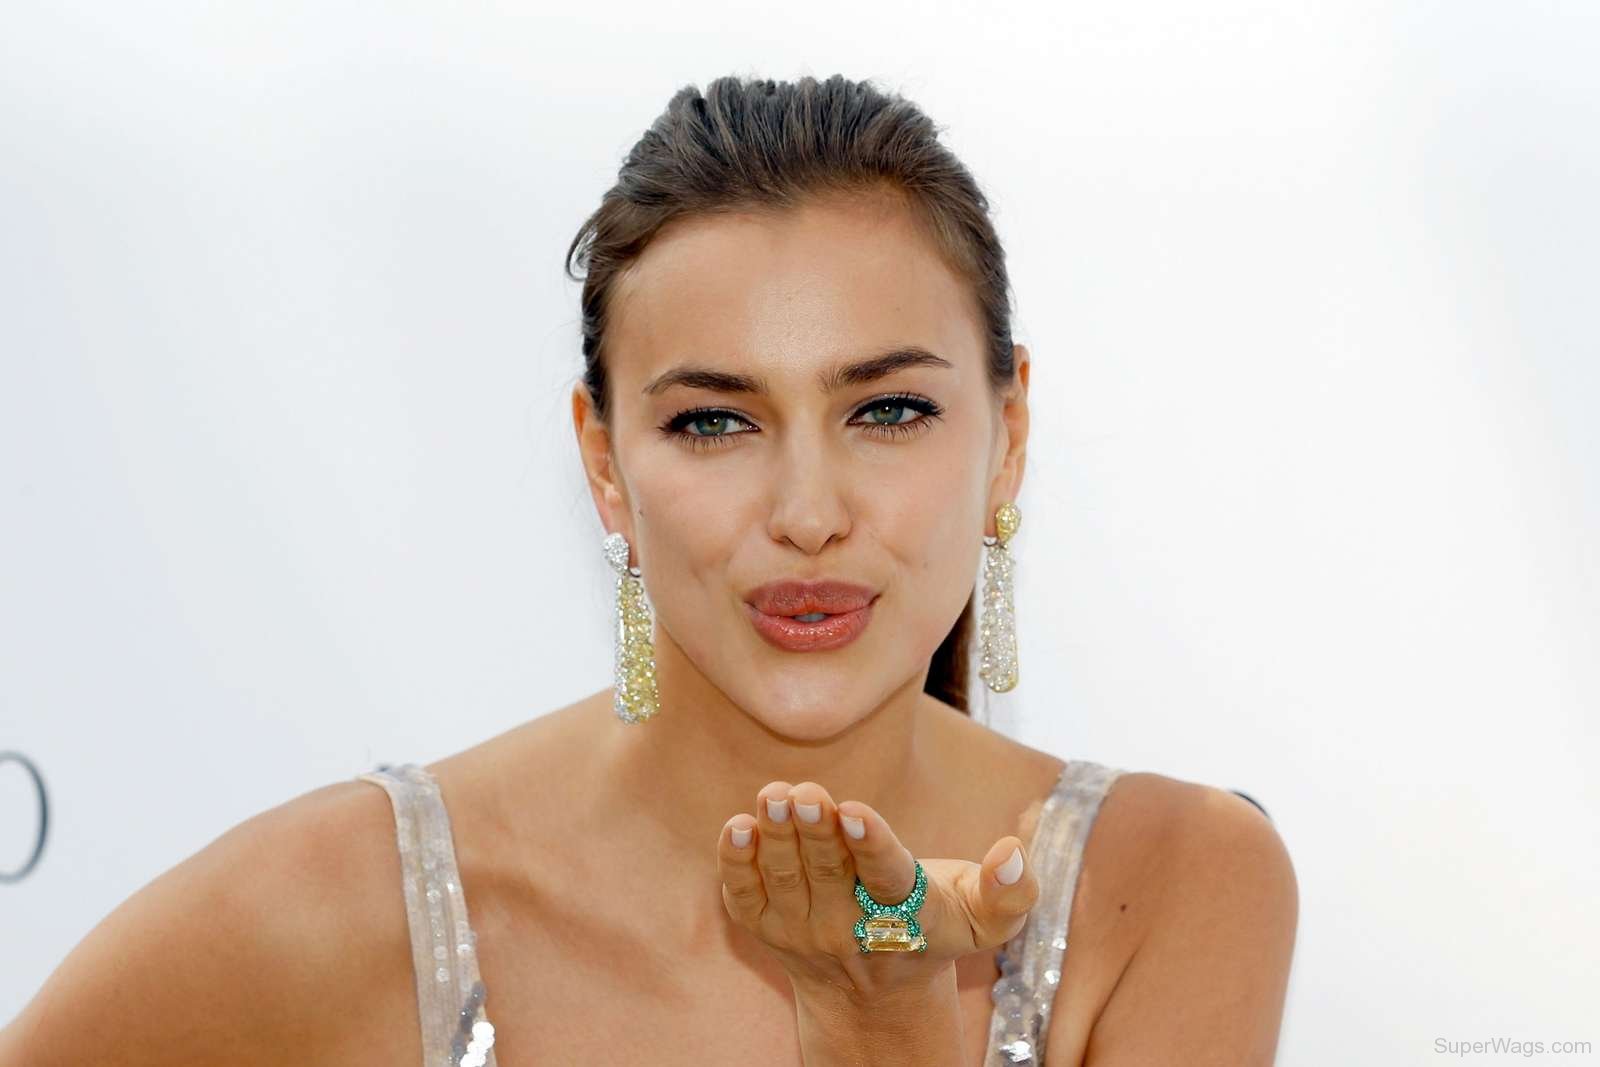 Pretty Irina Shayk Super Wags Hottest Wives And Girlfriends Of High